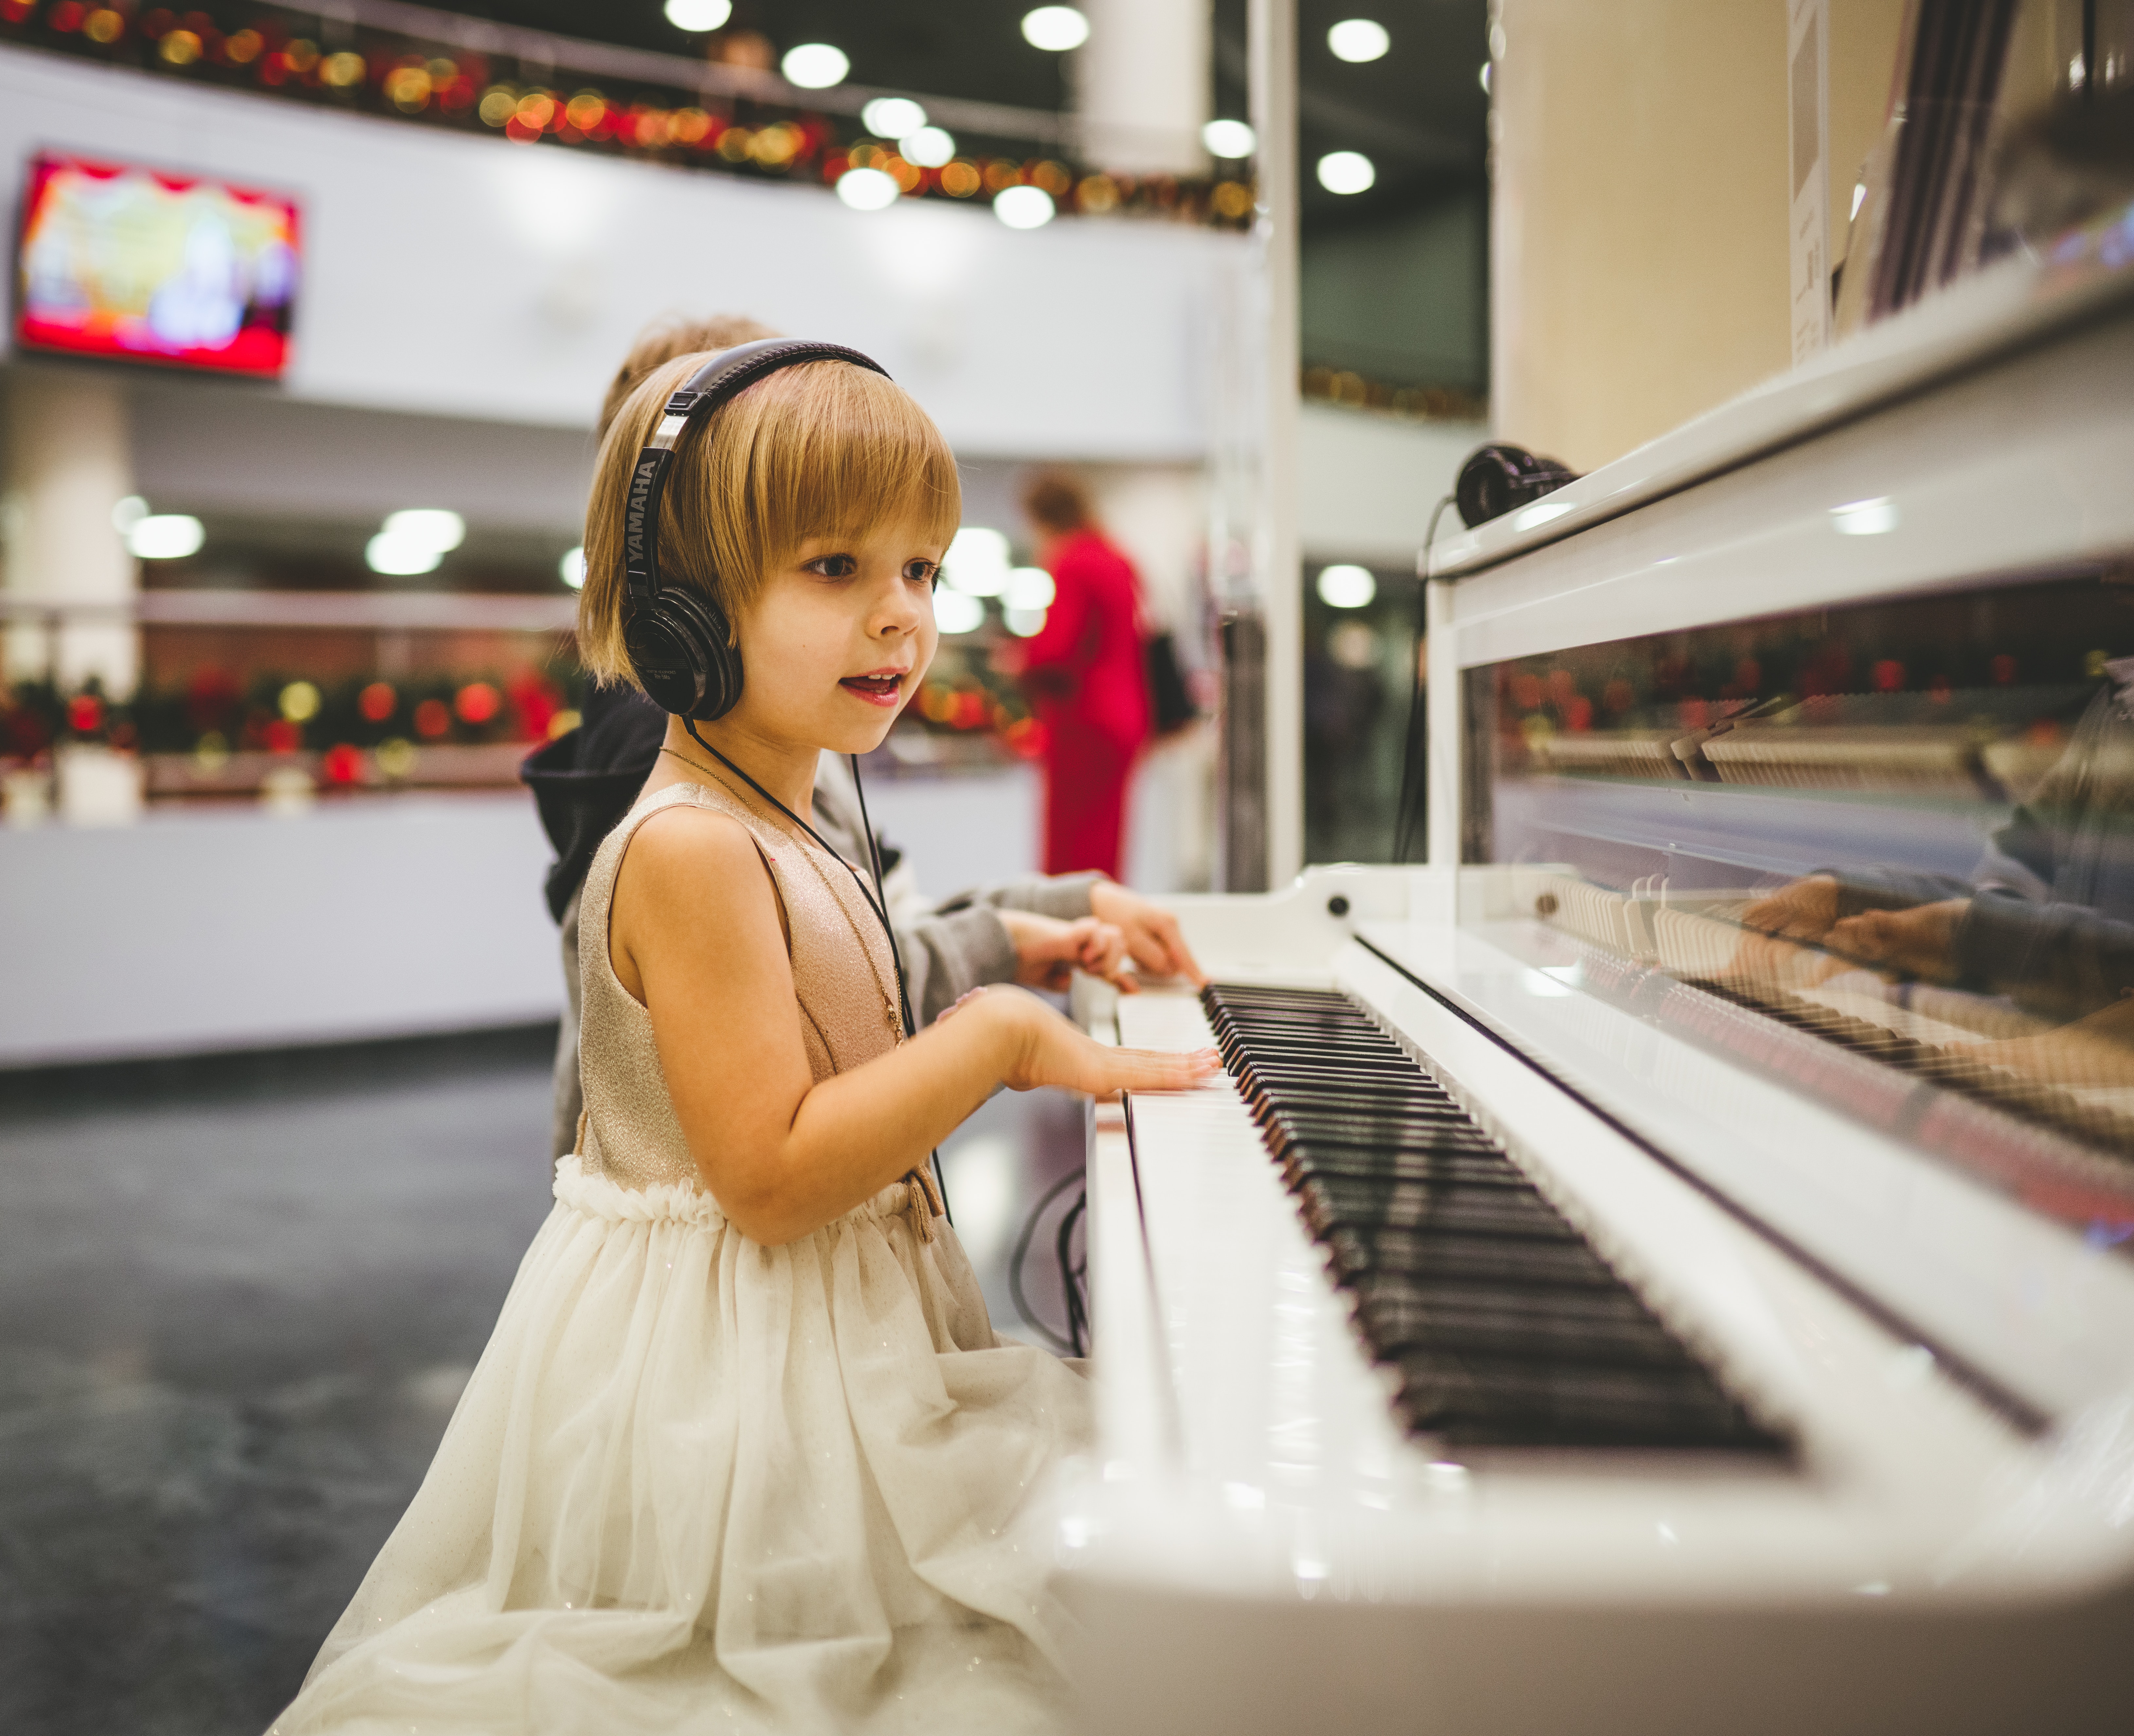 Top 10 Best Piano for Kids in 2020